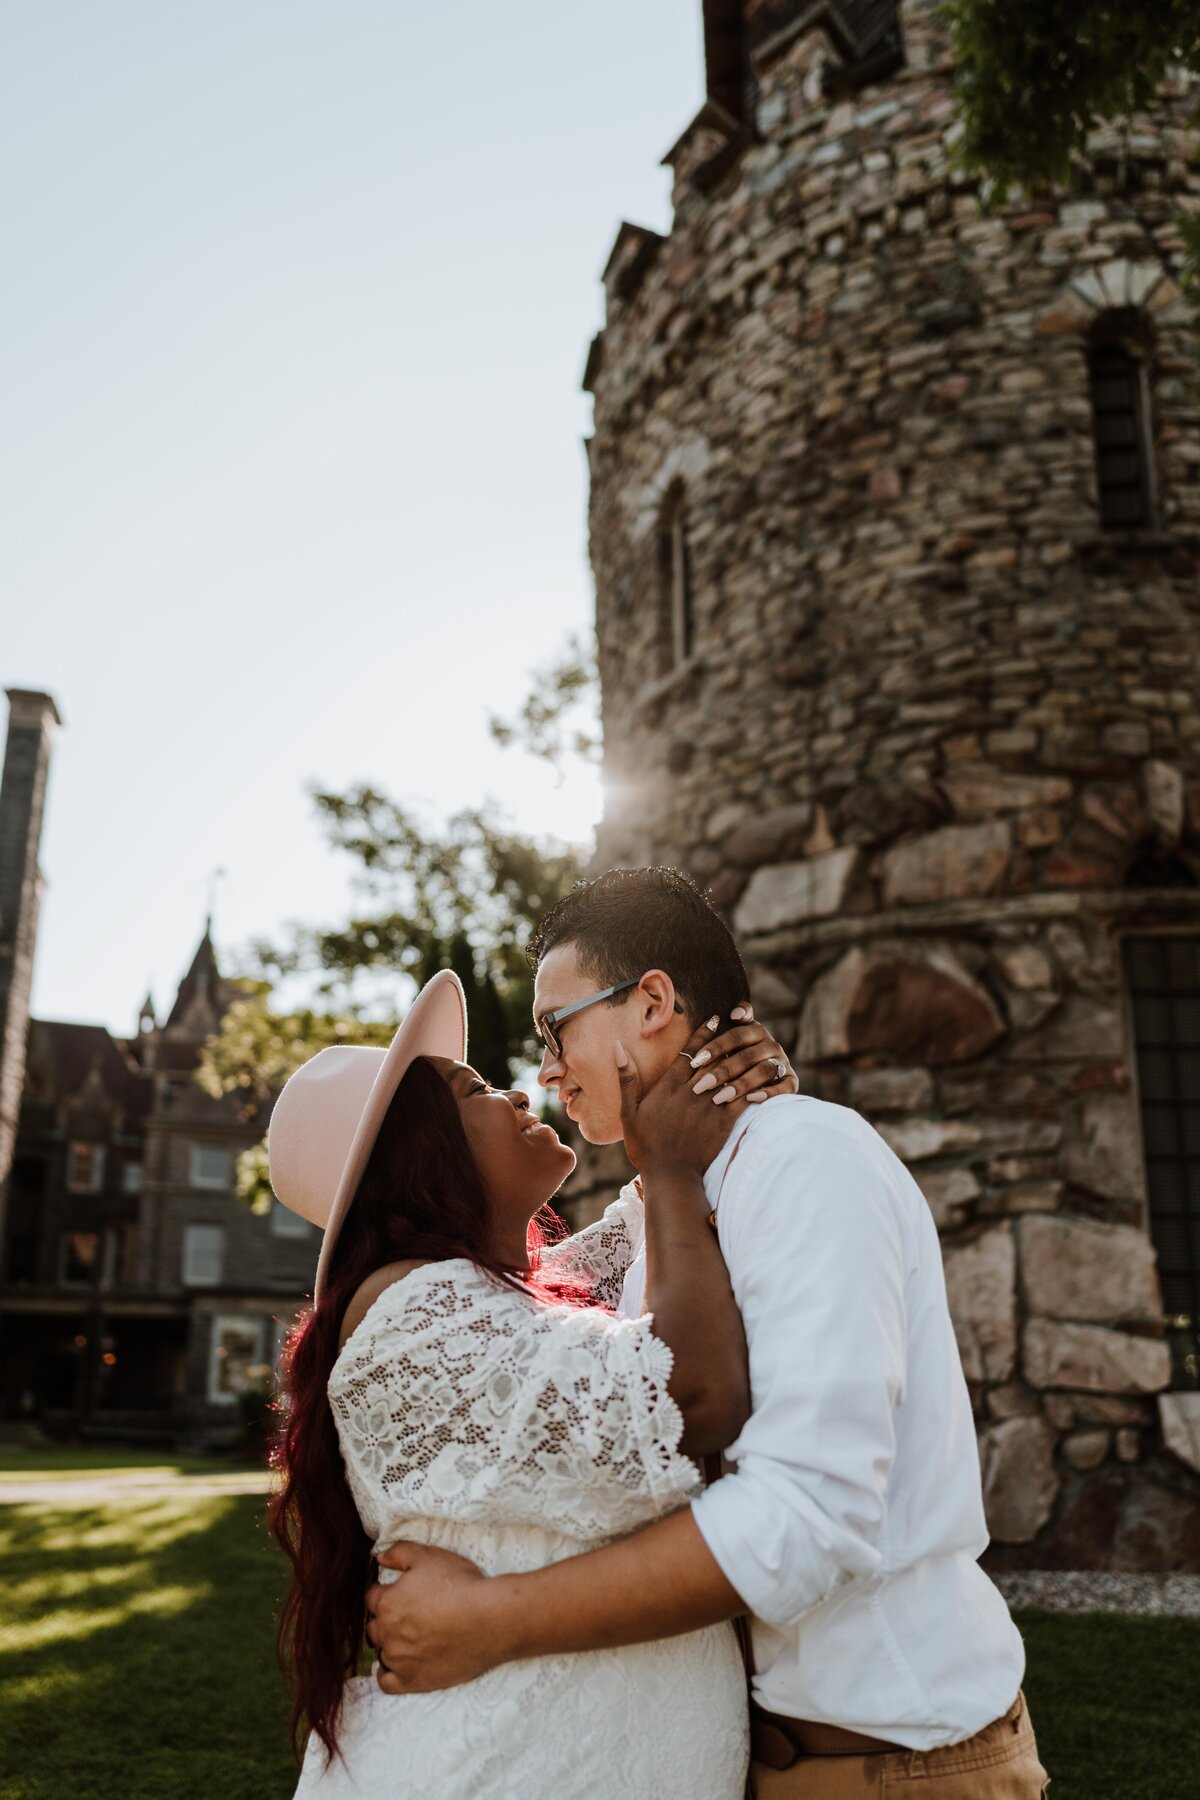 Married couple hugging at Boldt Castle in Thousand Islands, NY at sunset.